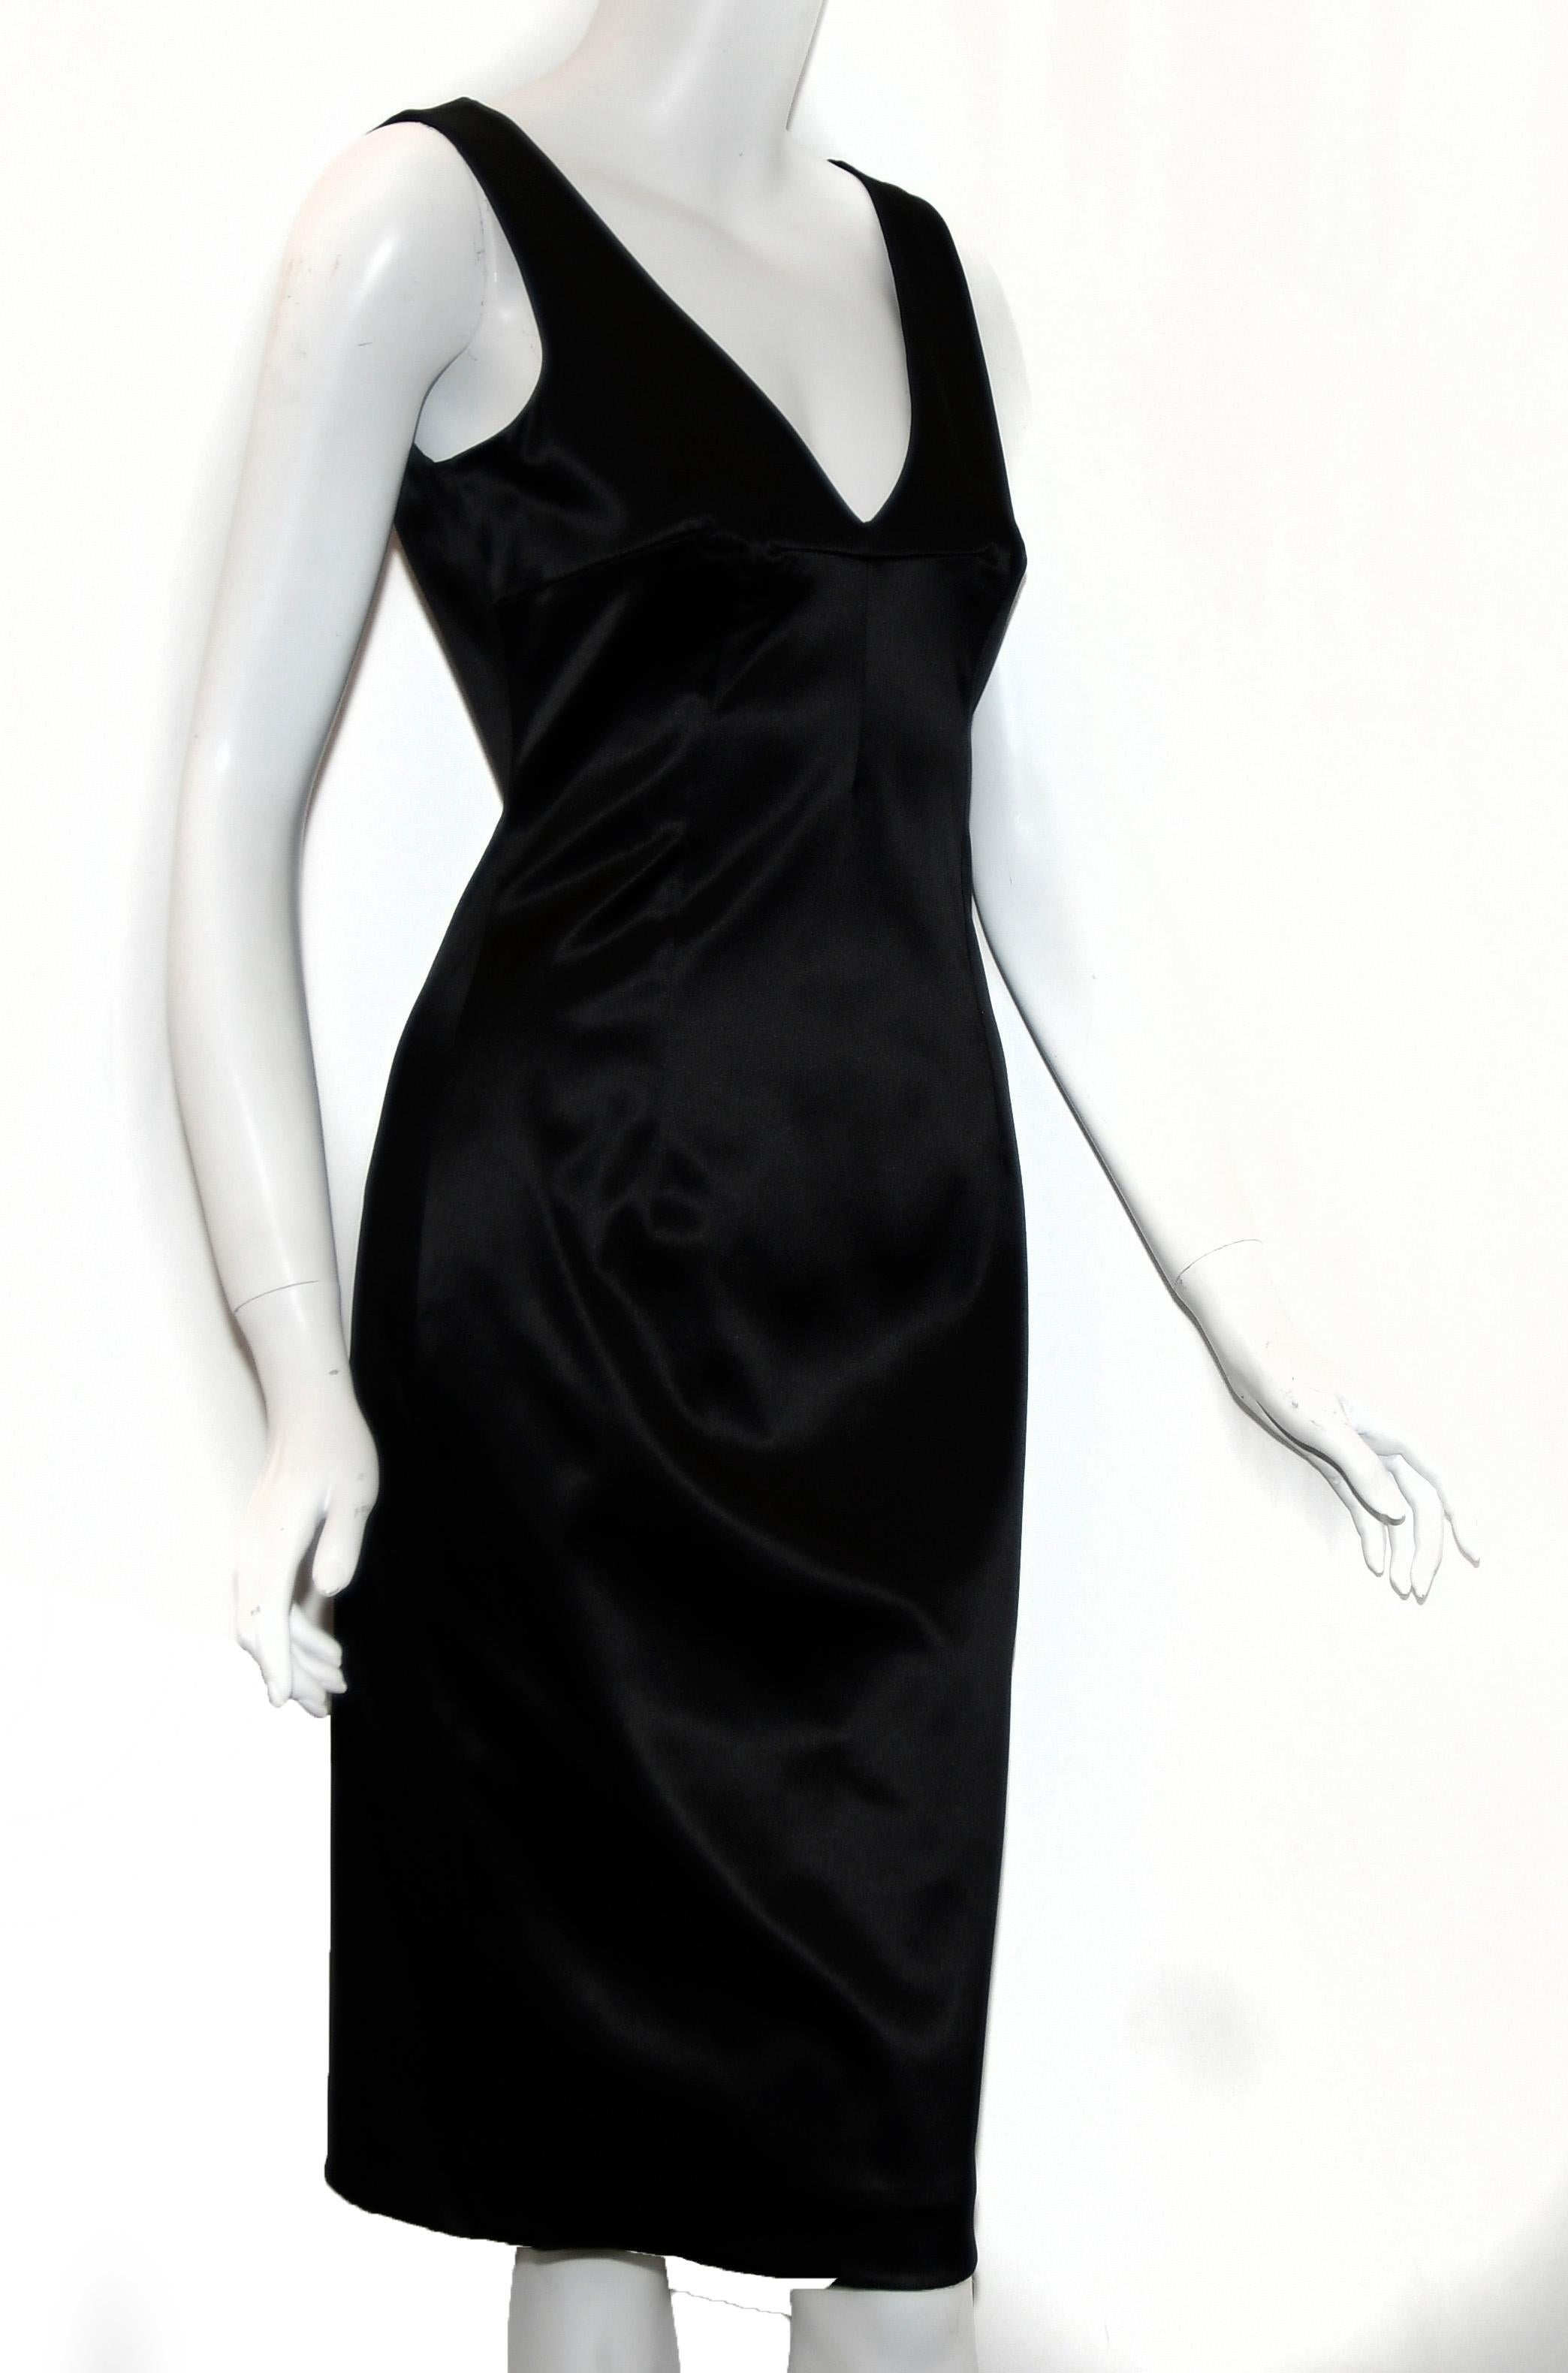 Dolce & Gabbana black stretchy satin sleeveless dress contains a zipper at back for closure and a single vent, also, at back.  This dress is fully lined in a black satin .  The front  & back include curved darts from bustline to the hem and from the